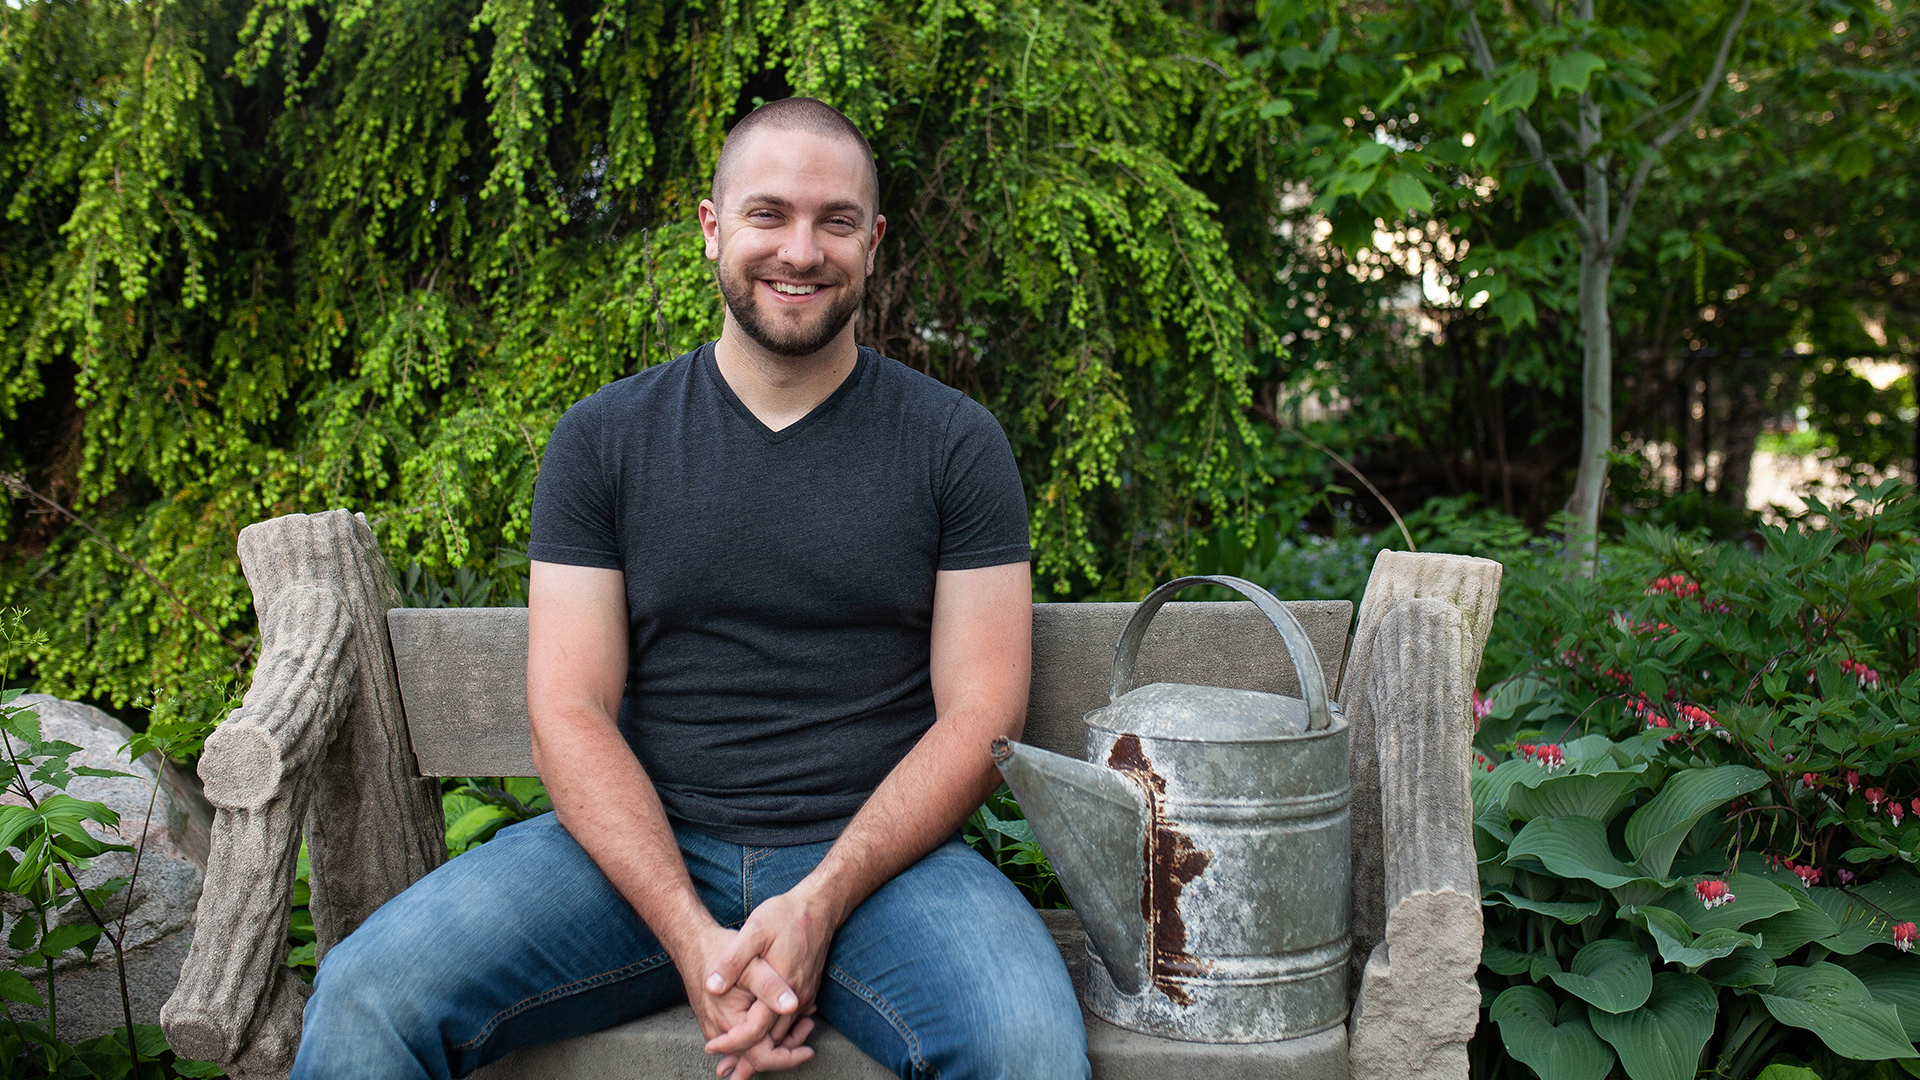 Co-host Ben Futa sits on a garden bench next to a weathered watering can with green shrubs and trees behind and around him